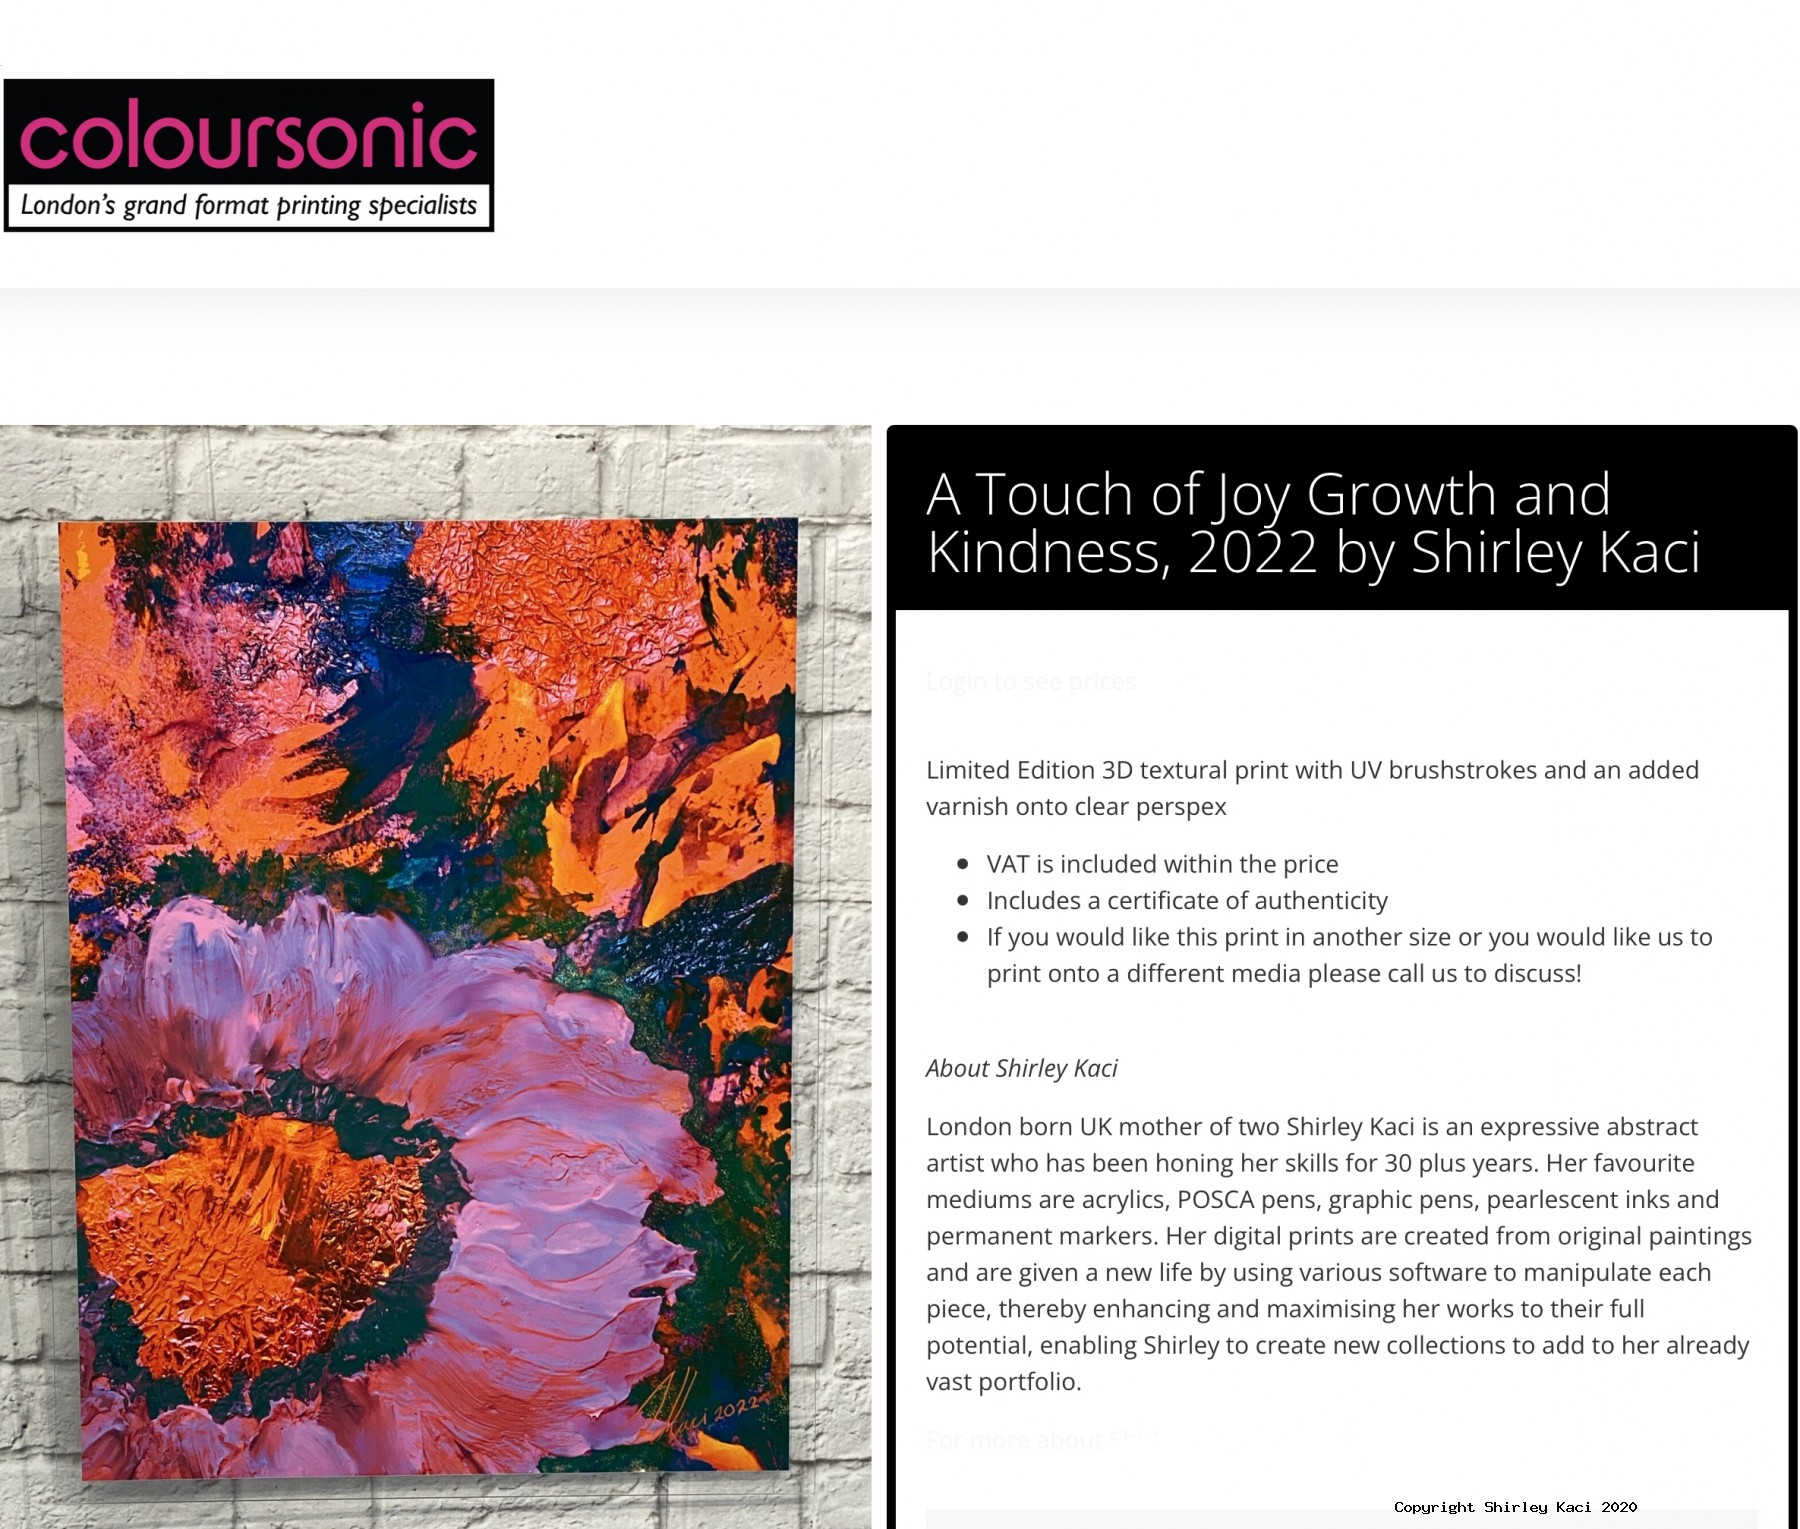 Limited Edition “A touch of joy growth and kindness”